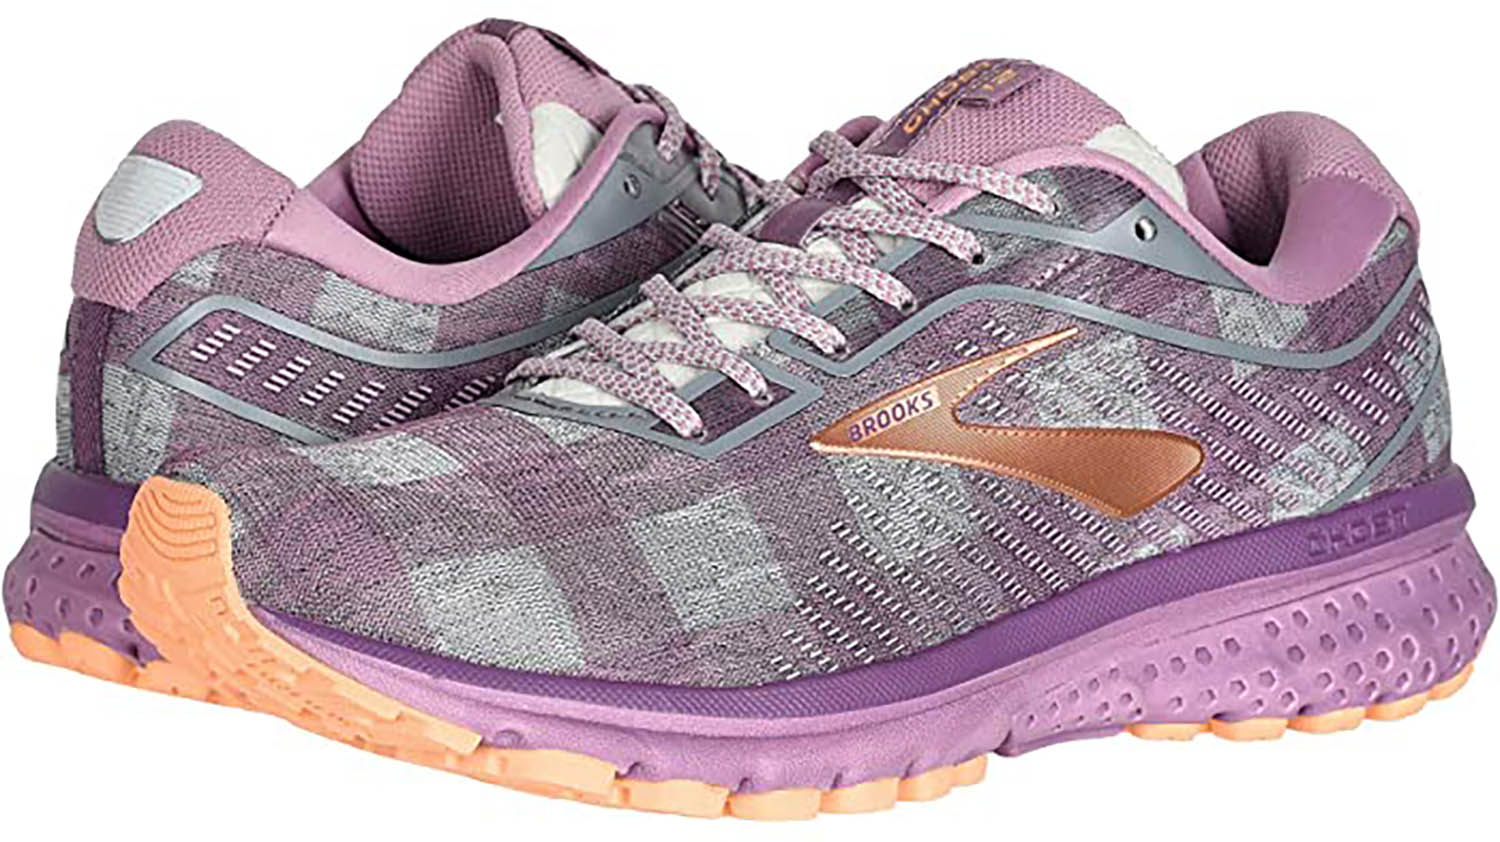 Best Running Shoes for Women Over 50 